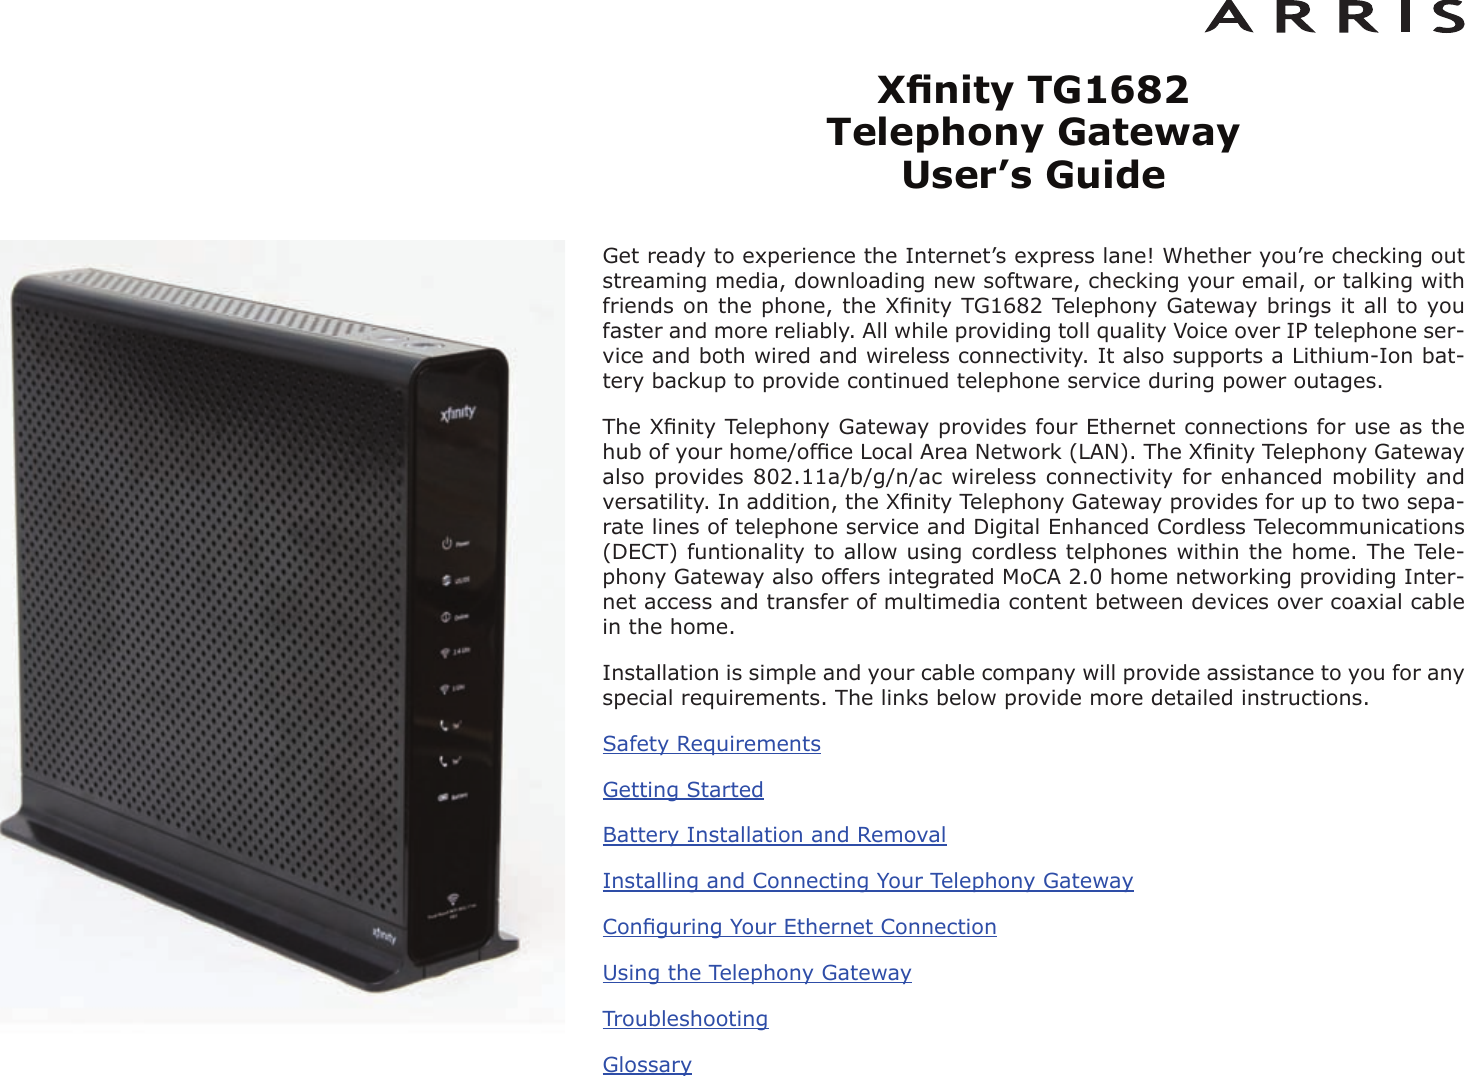 Xﬁnity TG1682 Telephony Gateway User’s GuideGet ready to experience the Internet’s express lane! Whether you’re checking outstreaming media, downloading new software, checking your email, or talking withfriends on the phone, the Xﬁnity TG1682 Telephony Gateway brings it all to youfaster and more reliably. All while providing toll quality Voice over IP telephone ser -vice and both wired and wireless connectivity. It also supports a Lithi um-Ion bat-tery backup to provide continued telephone service during power outages.The Xﬁnity Telephony Gateway provides four Ethernet connections for use as thehub of your home/ofﬁce Local Area Network (LAN). The Xﬁnity Telephony Gatewayalso provides 802.11a/b/g/n/ac wireless connectivity for enhanced mobility andversatility. In addition, the Xﬁnity Telephony Gateway provides for up to two sepa-rate lines of telephone service and Digital Enhanced Cordless Telecommunications(DECT) funtionality to allow using cordless telphones within the home. The Tele-phony Gateway also offers integrated MoCA 2.0 home networking providing Inter-net access and transfer of multimedia content between devices over coaxial cablein the home.Installation is simple and your cable company will provide assistance to you for anyspecial requirements. The links below provide more detailed instructions.Safety RequirementsGetting StartedBattery Installation and RemovalInstalling and Connecting Your Telephony GatewayConﬁguring Your Ethernet ConnectionUsing the Telephony GatewayTroubleshootingGlossary